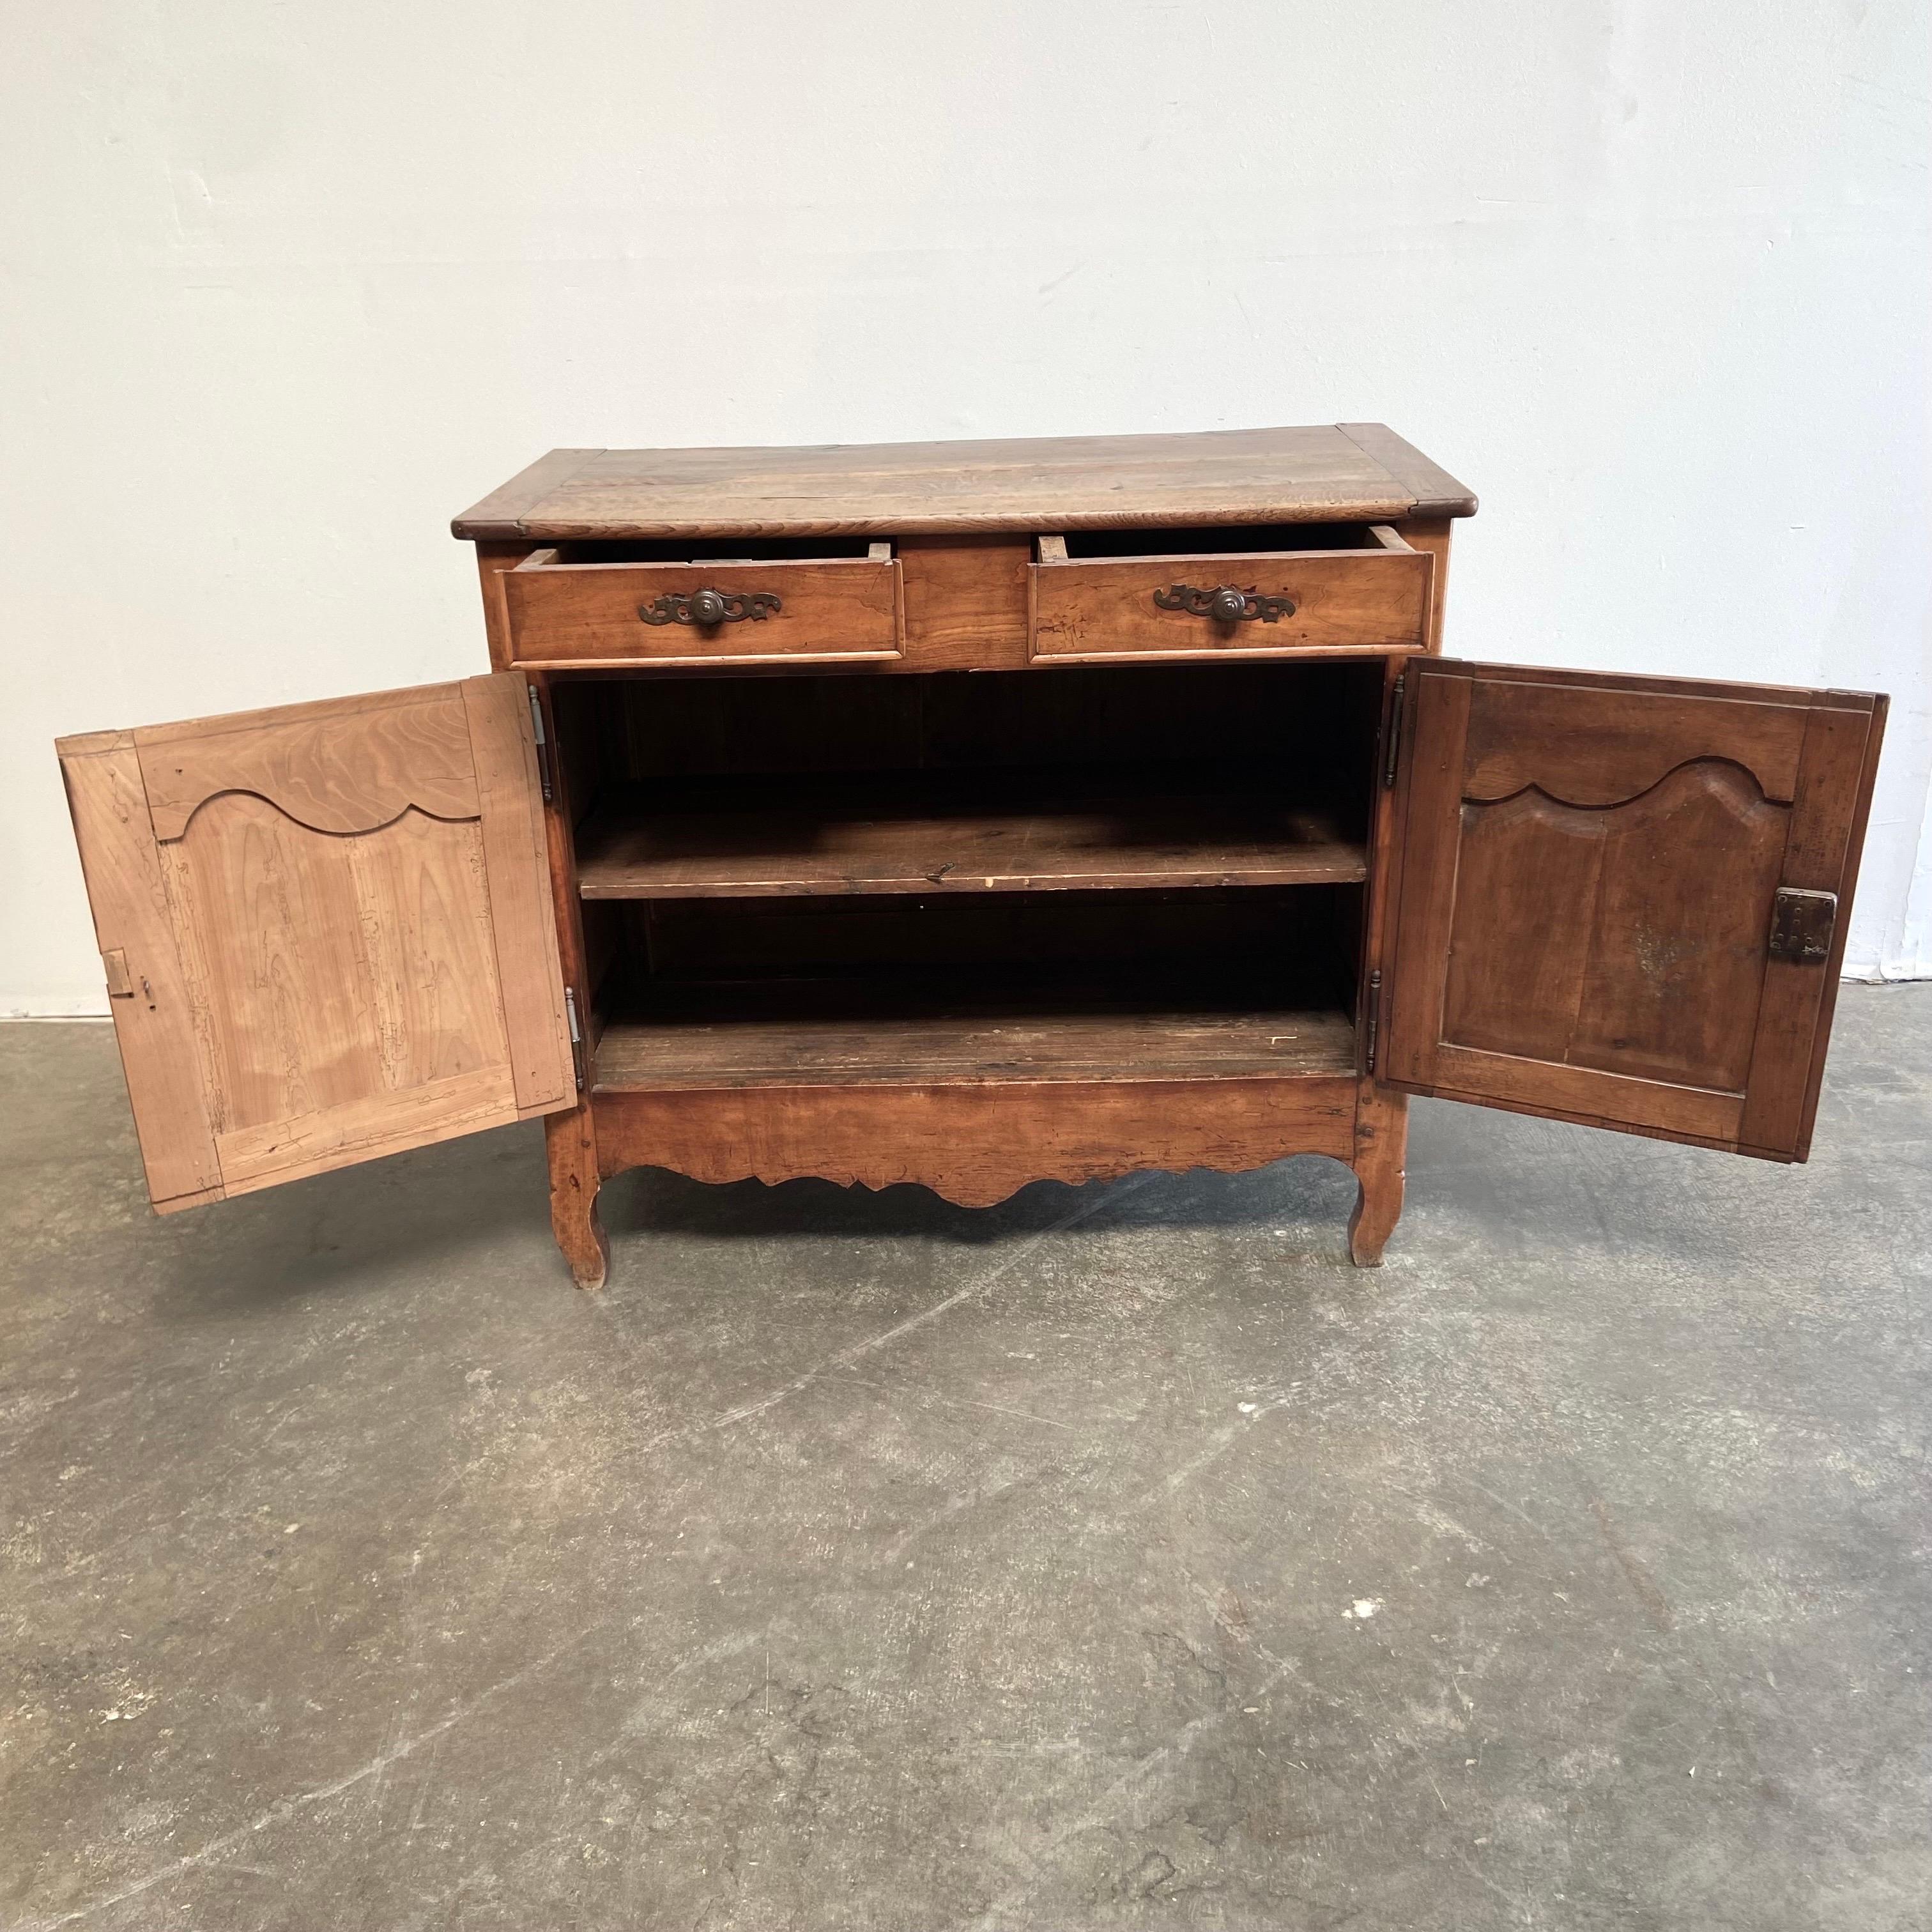 French Early 19th Century Transition Style Walnut Buffet with Doors and Drawers In Good Condition For Sale In Brea, CA